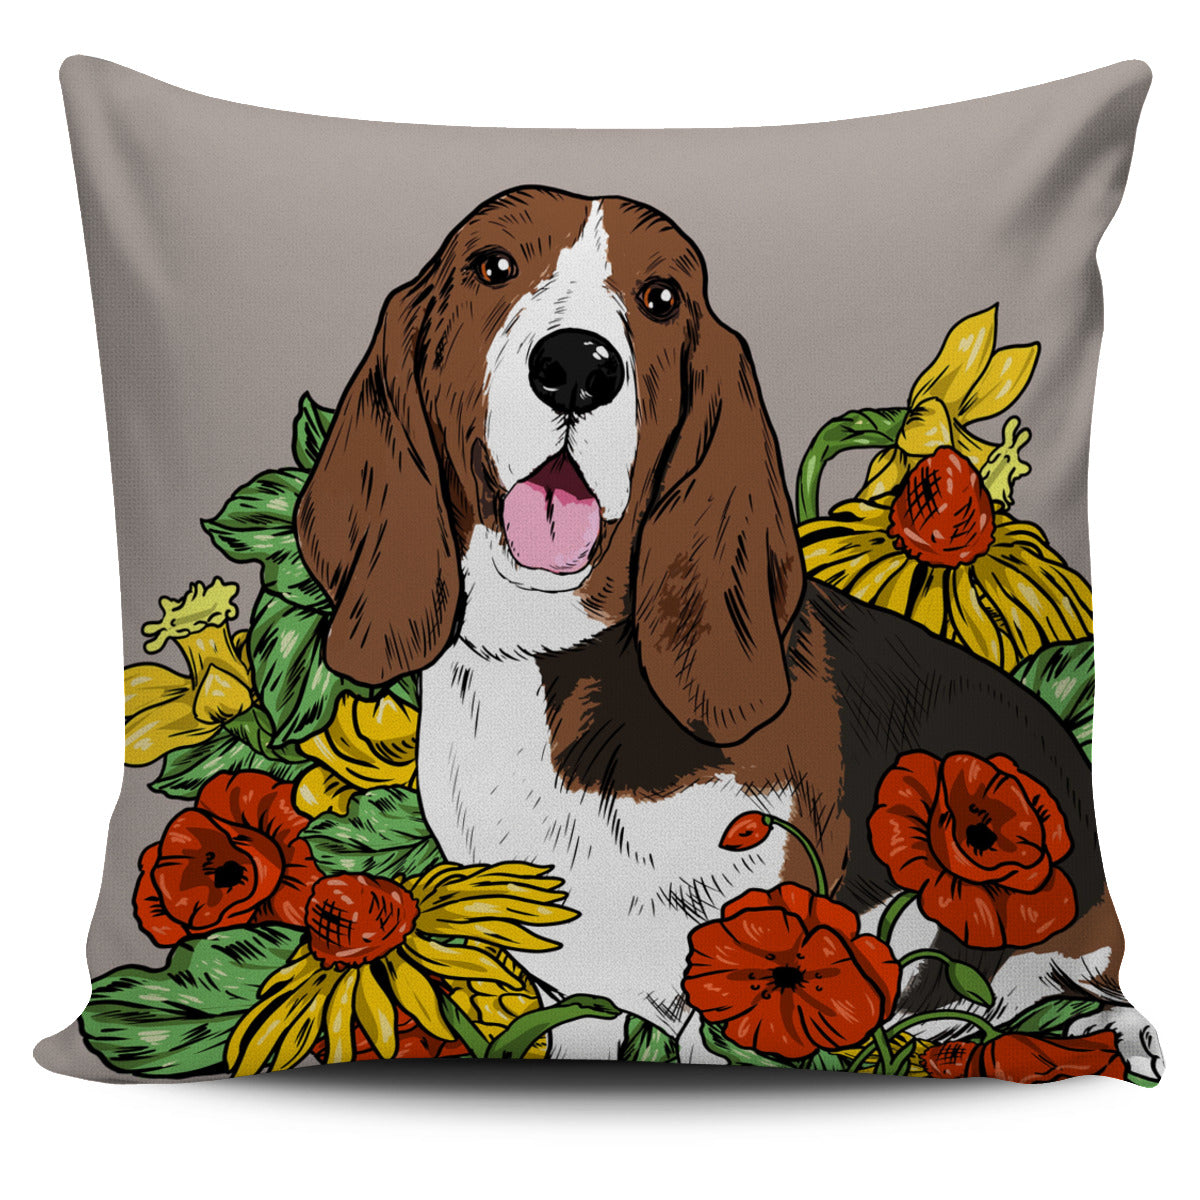 Illustrated Hound Pillow Cover